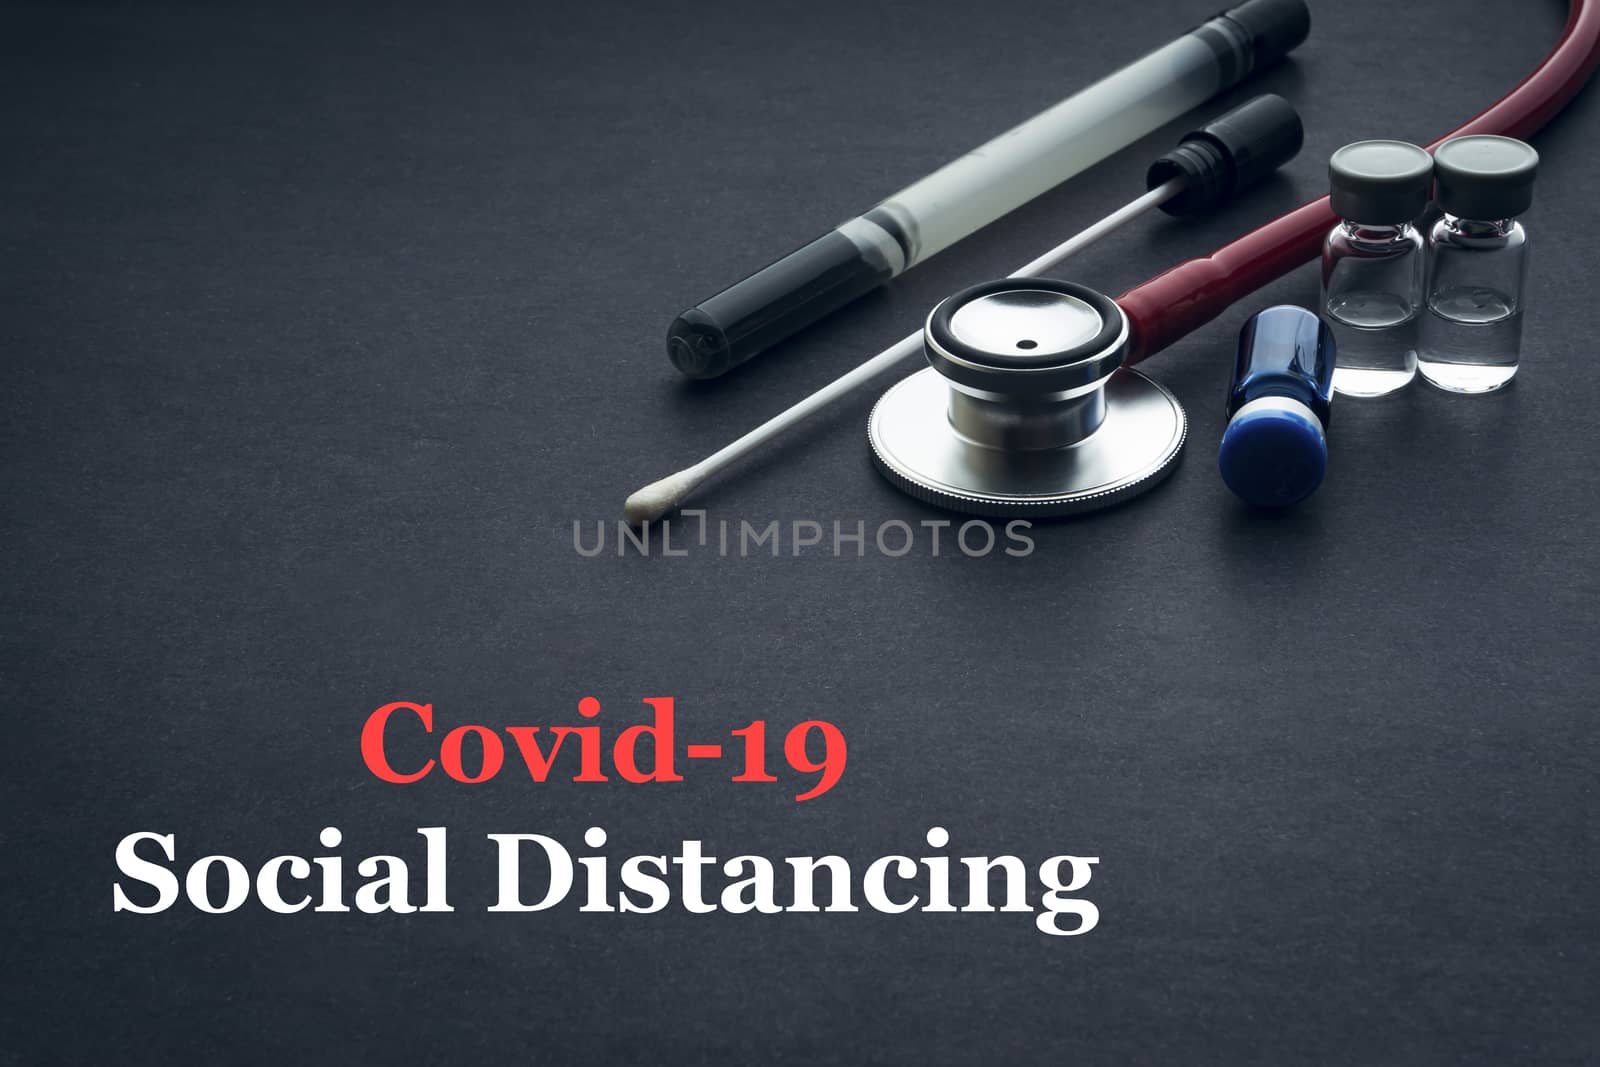 COVID-19 or CORONAVIRUS SOCIAL DISTANCING text with stethoscope, medical swab and vial on black background by silverwings